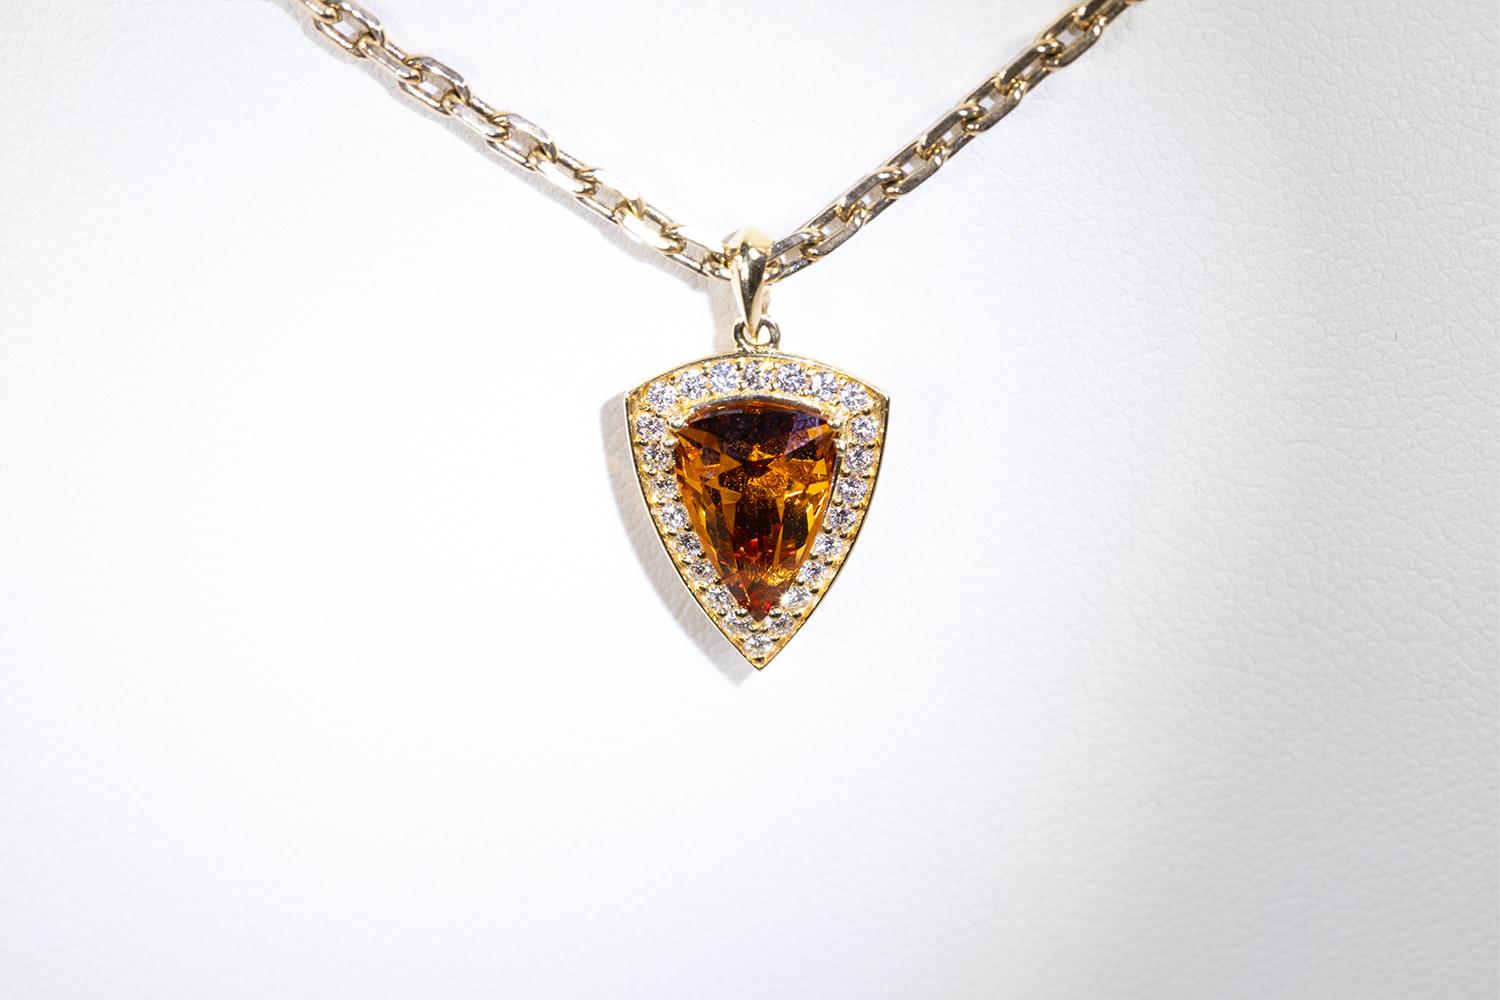 This is a beautiful richly colored 3.52 Carat Hessonite Garnet pendant of excellent quality. The trillion shaped stone is set in a Halo Pendant of 24 Diamonds that have a total weight of 0.312 Carats. The pendant is on a classic gold chain that